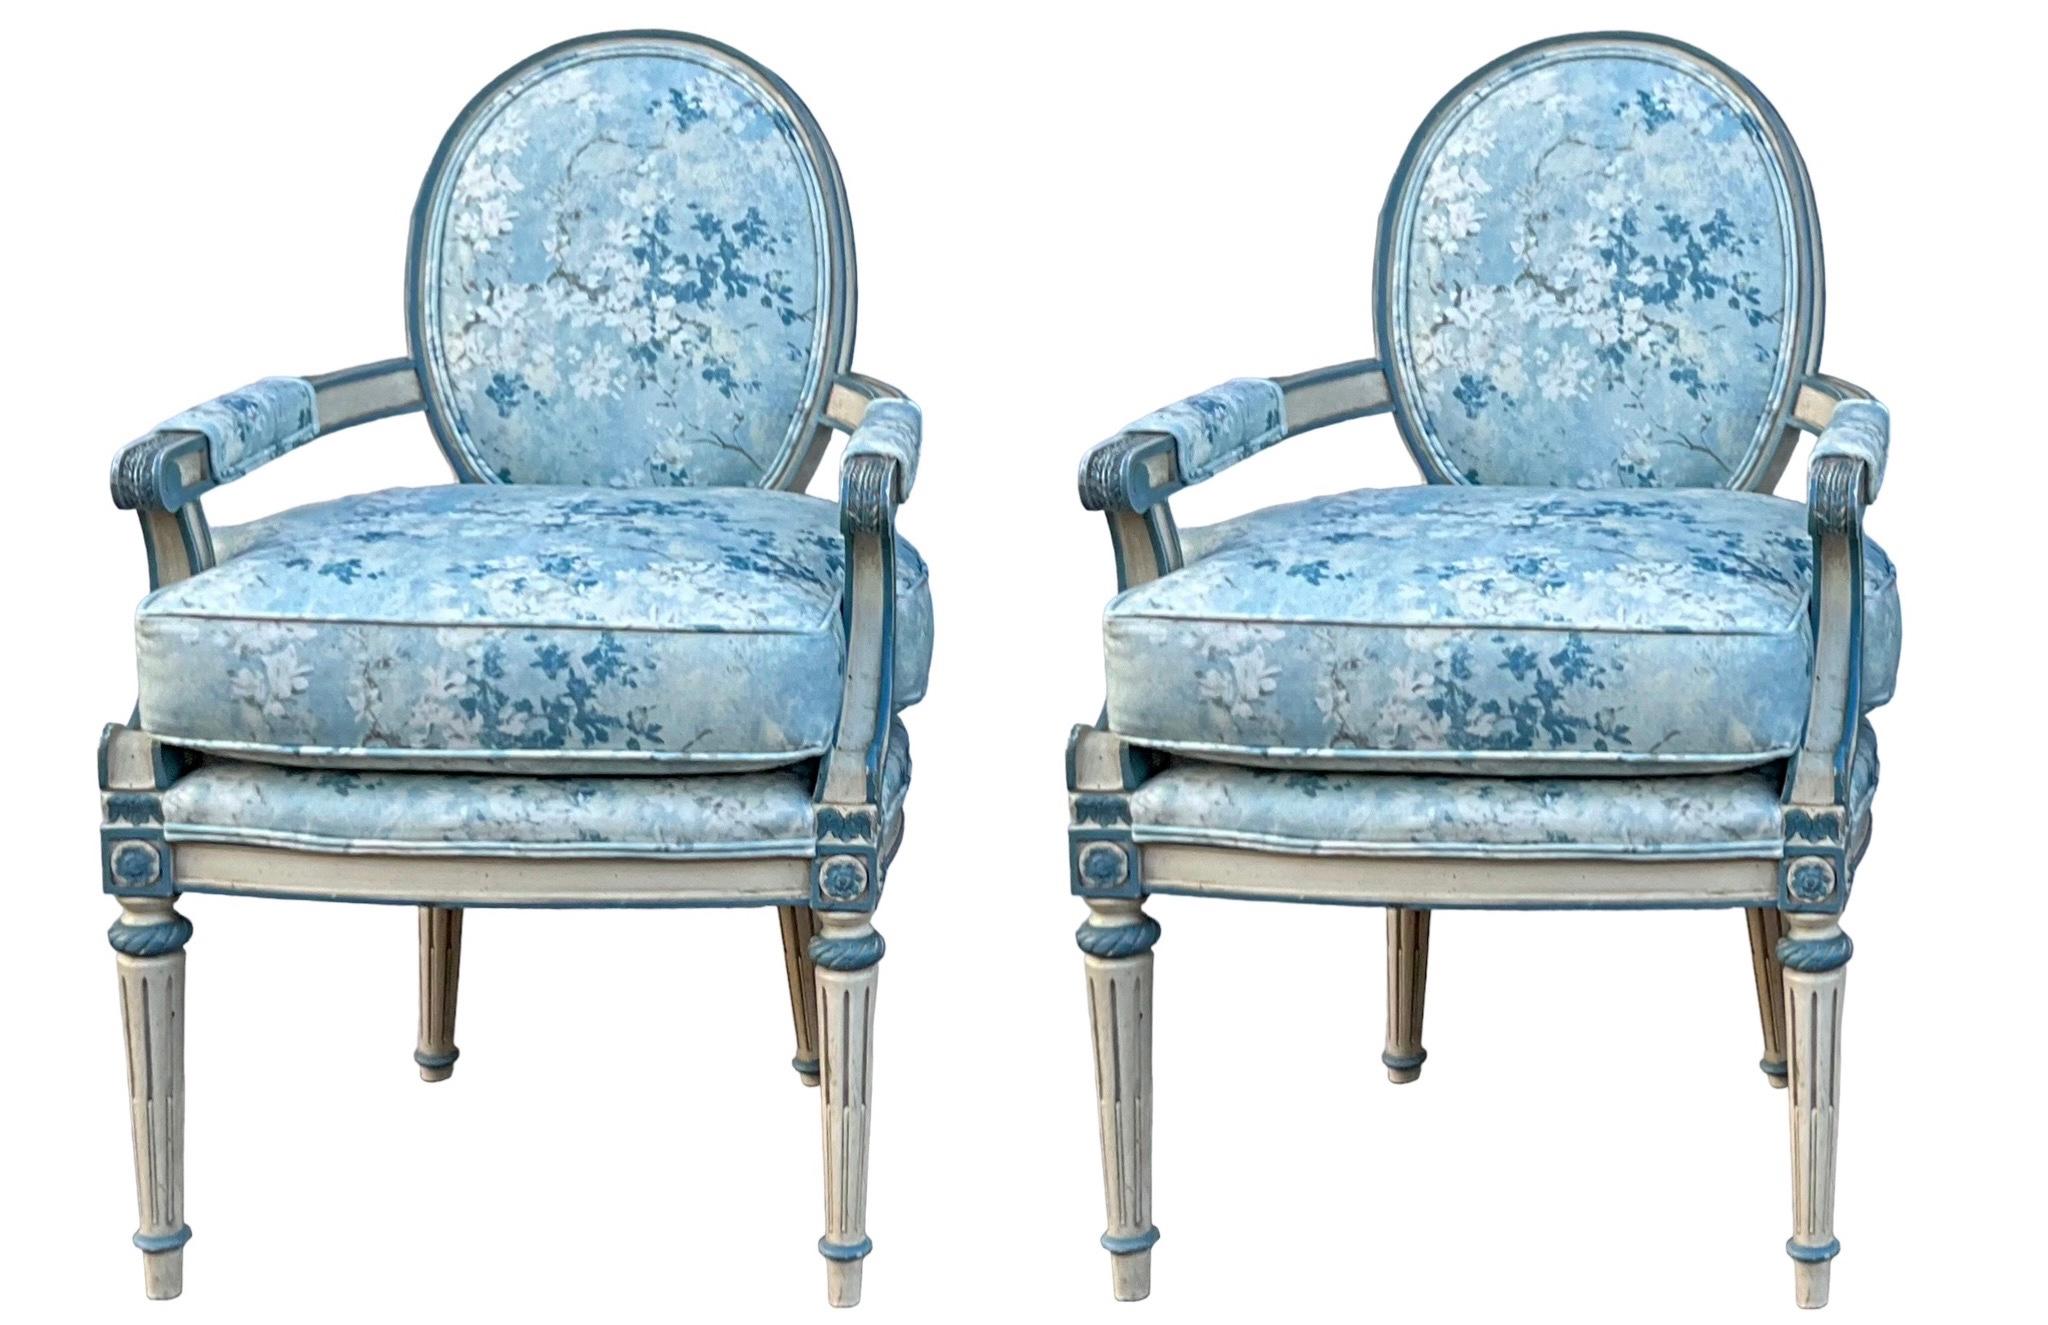 French Louis XVI Style Painted Blue Bergere Chairs In Floral Upholstery- Pair For Sale 1